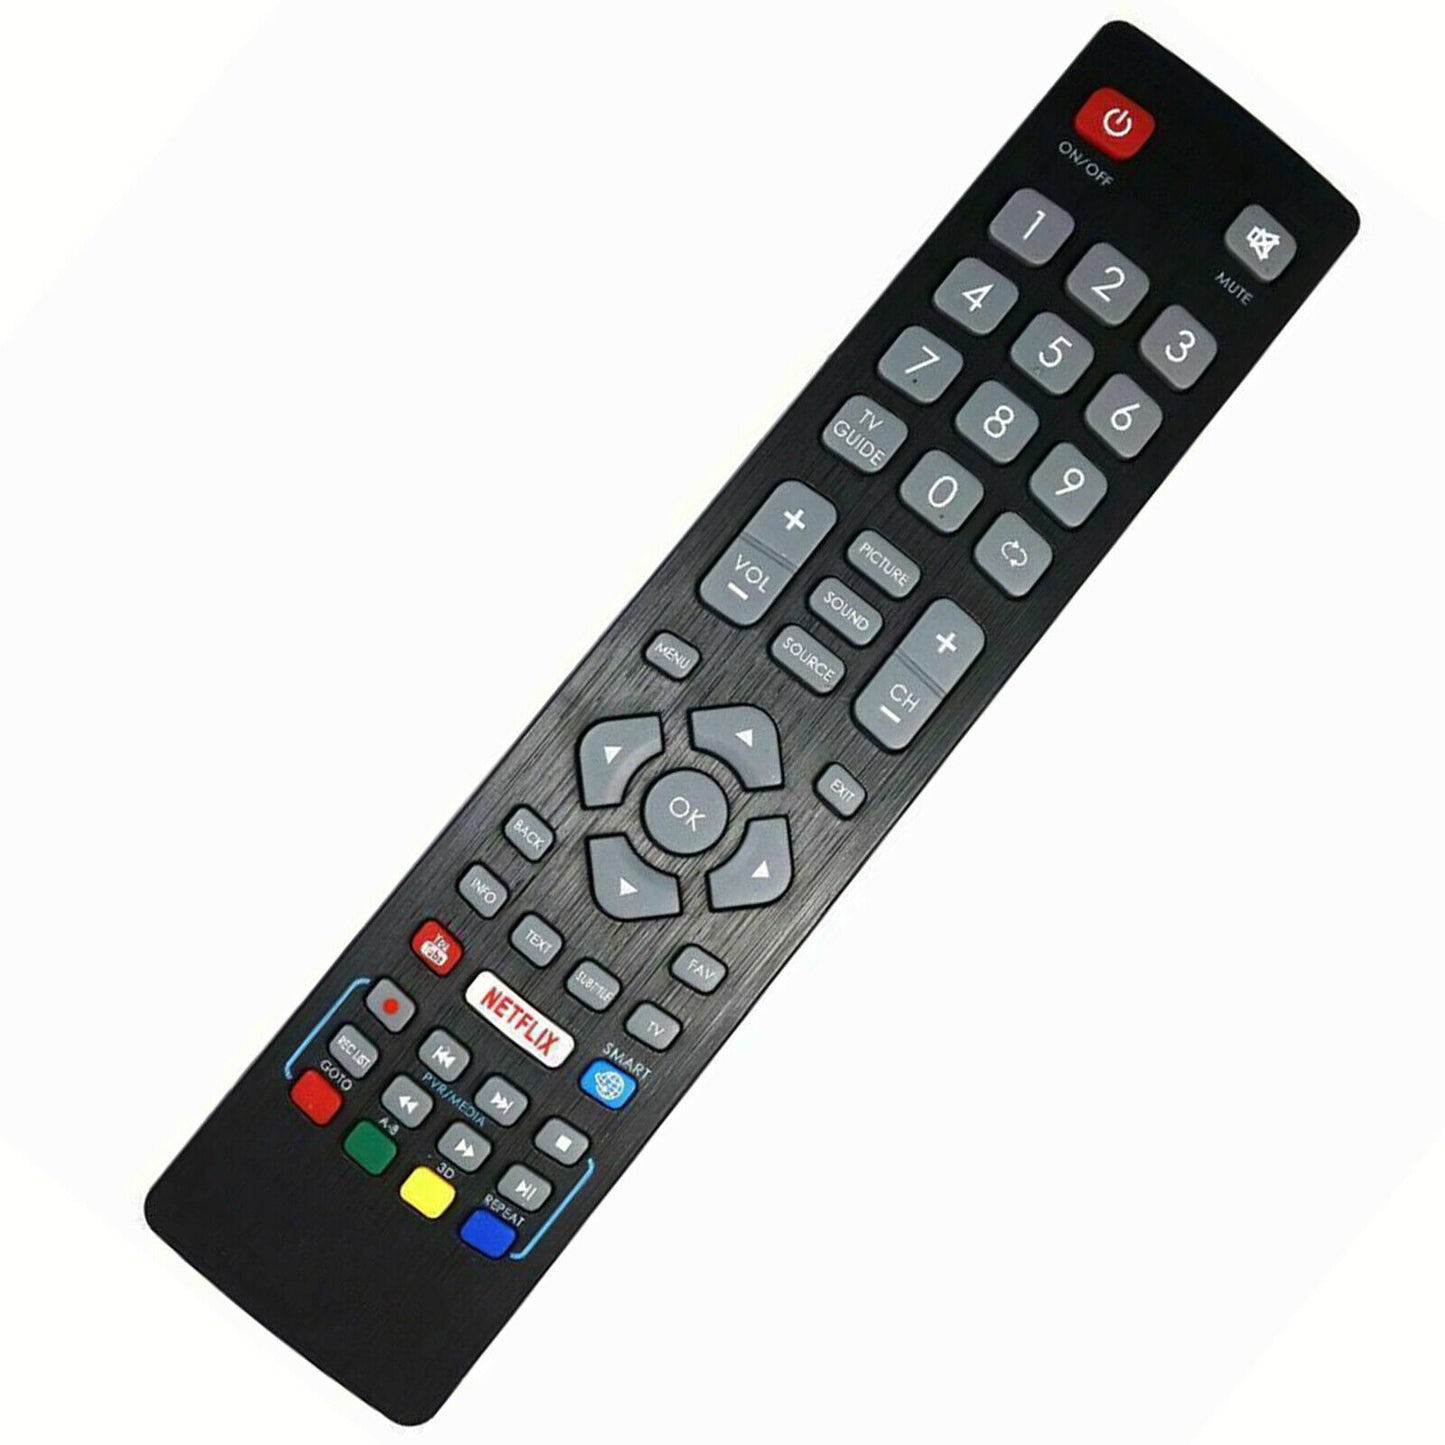 New BLFRMC0008 Remote Control for Blaupunkt Smart TV with NETFLIX YouTube Button